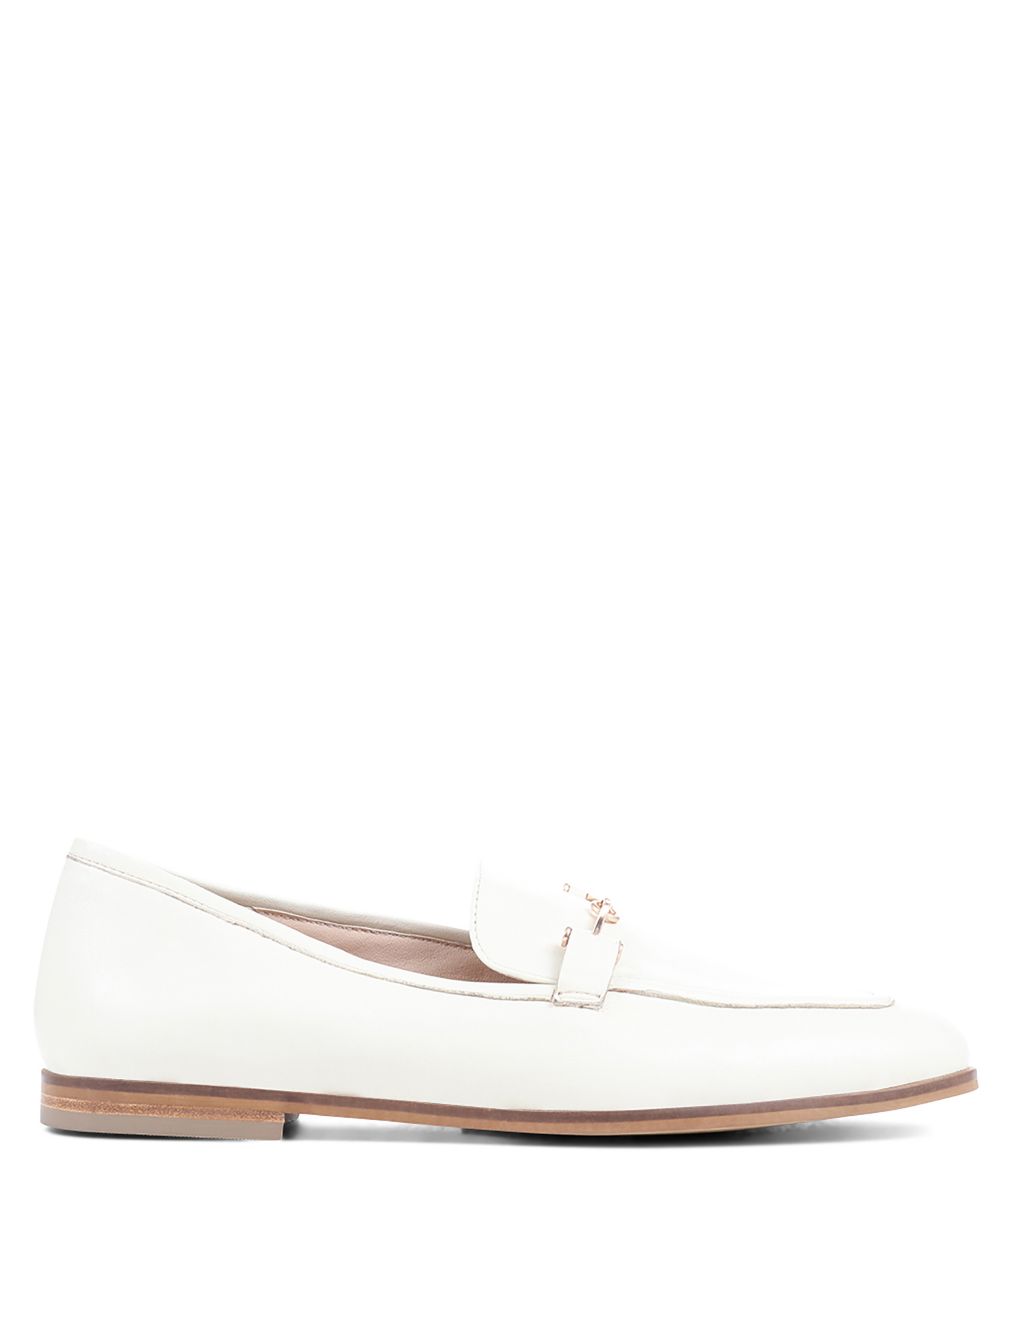 Leather Slip On Bar Flat Loafers image 2